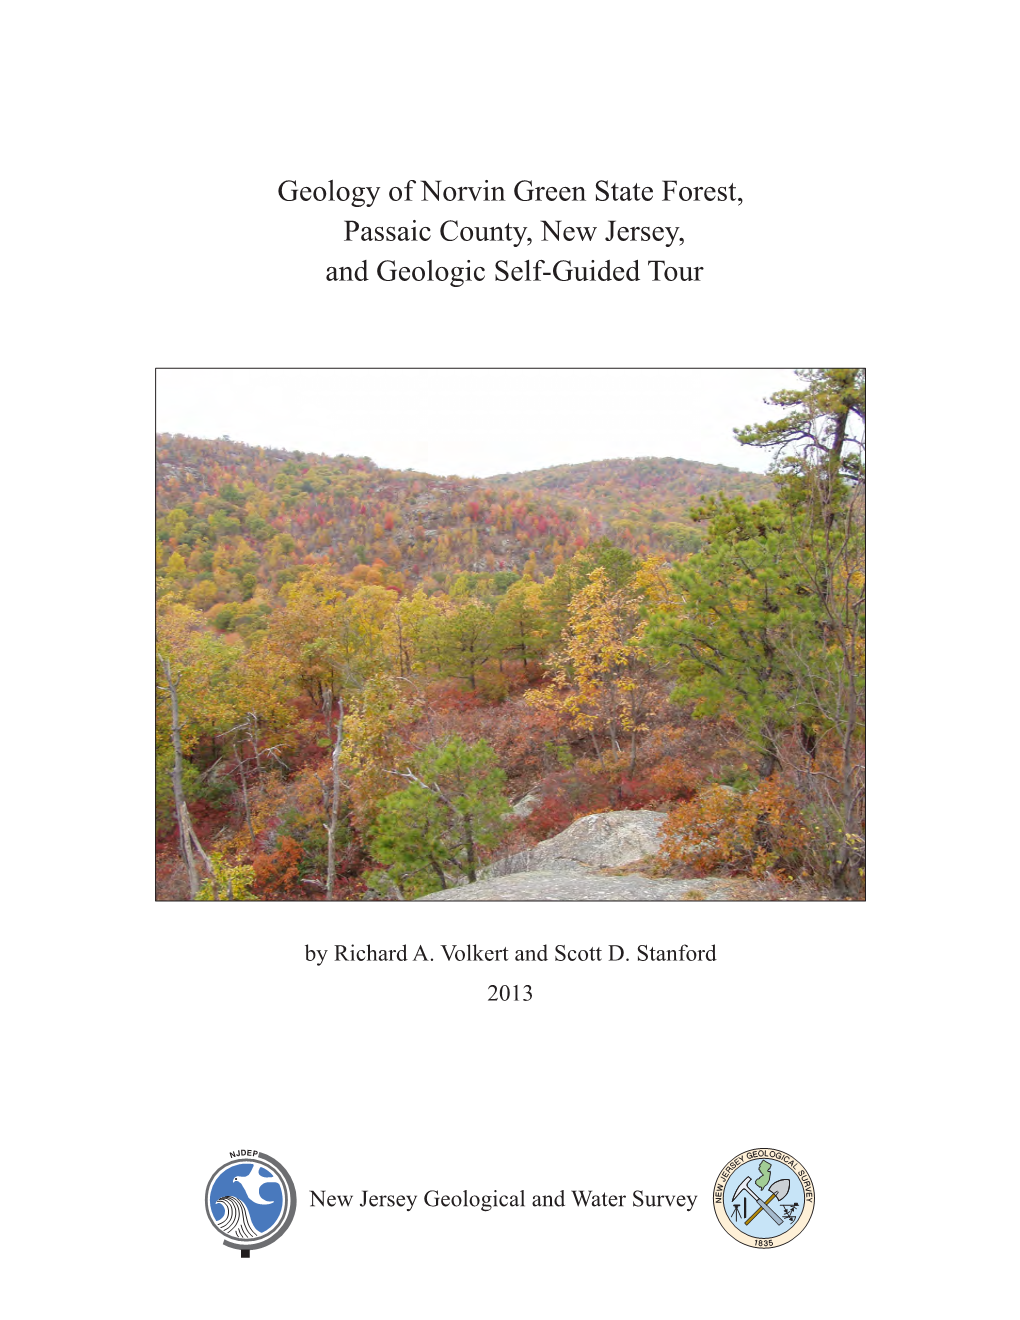 Geology of Norvin Green State Forest, Passaic County, New Jersey, and Geologic Self-Guided Tour